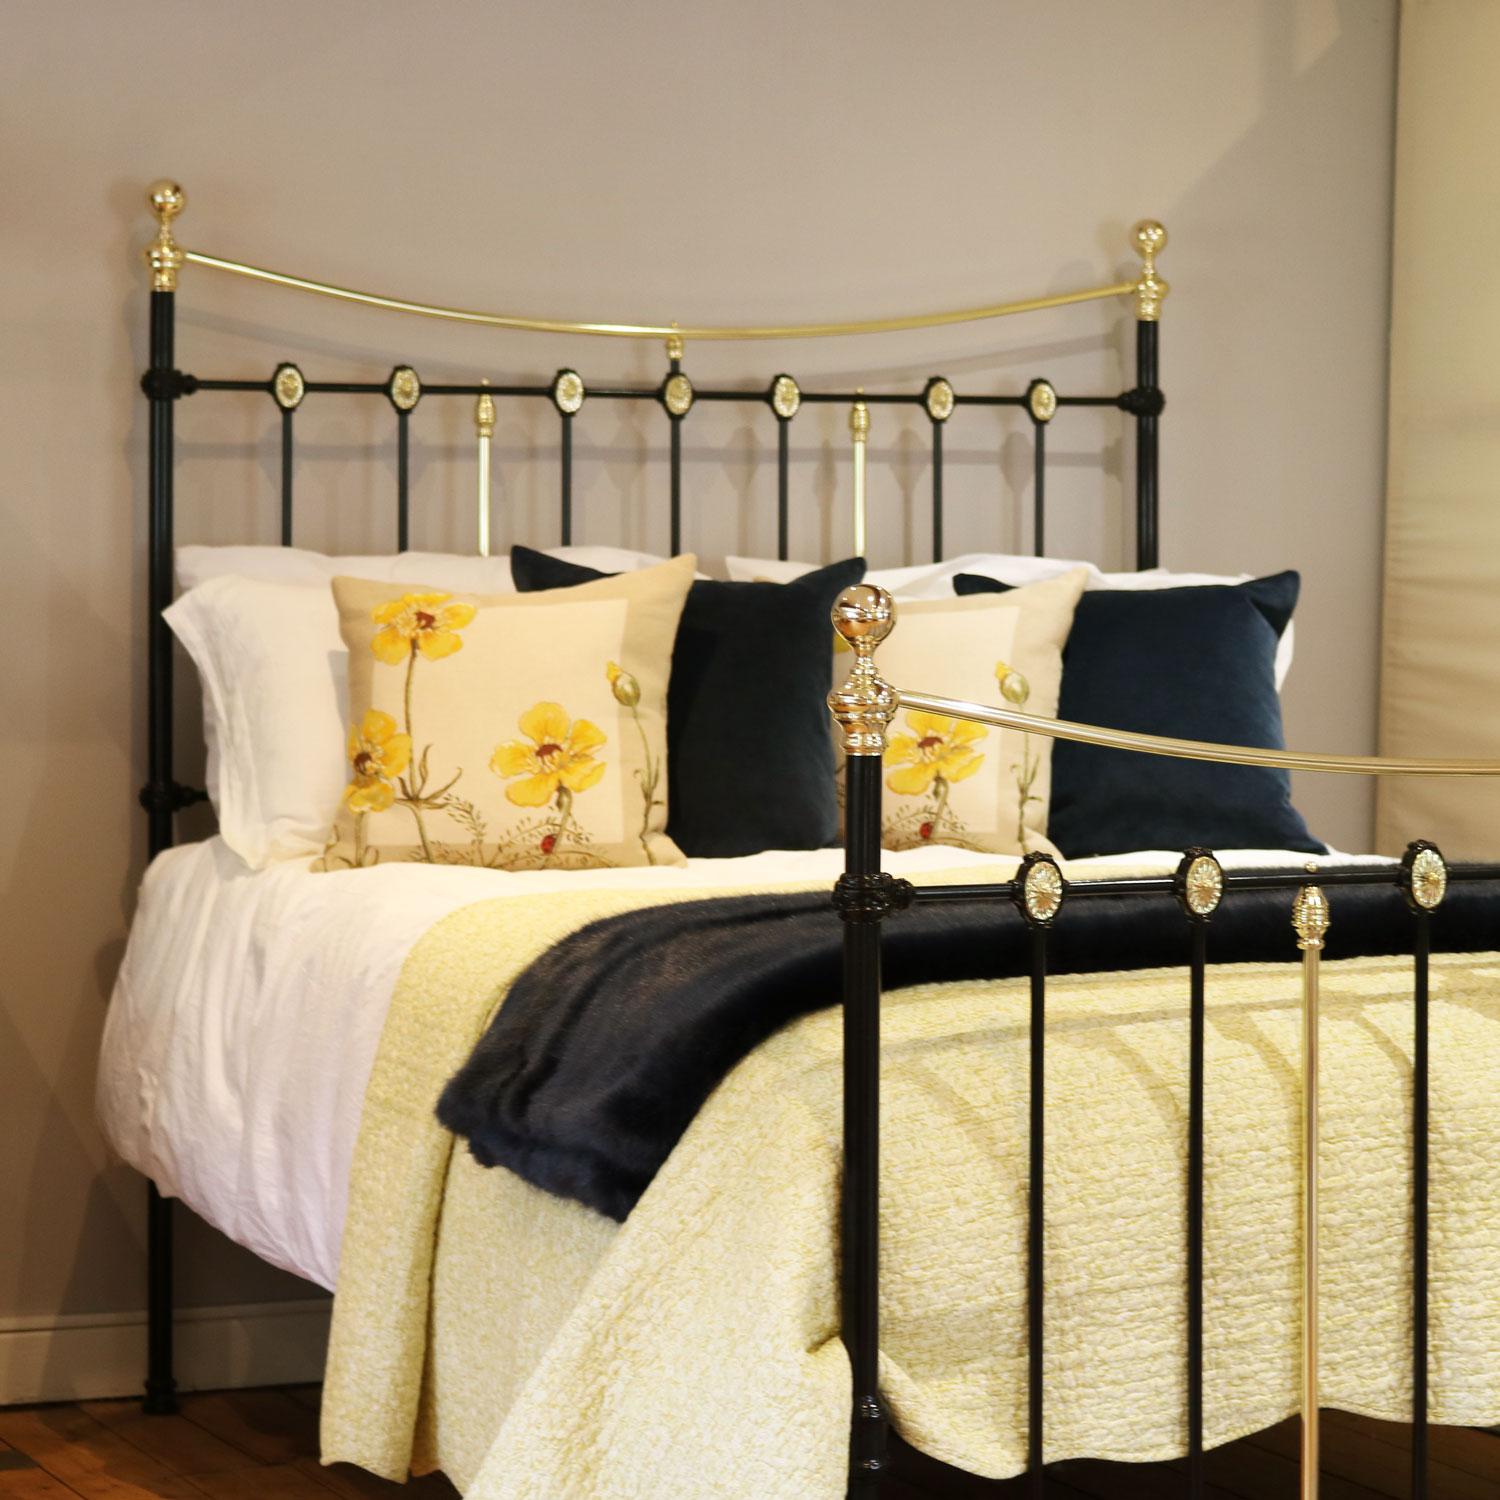 A decorative traditional brass and iron bedstead finished in black with decorative brass castings and curved brass top rails. 

This bed accepts a UK king size or US queen size (5ft, 60in or 150cm wide) base and mattress set.

The price includes